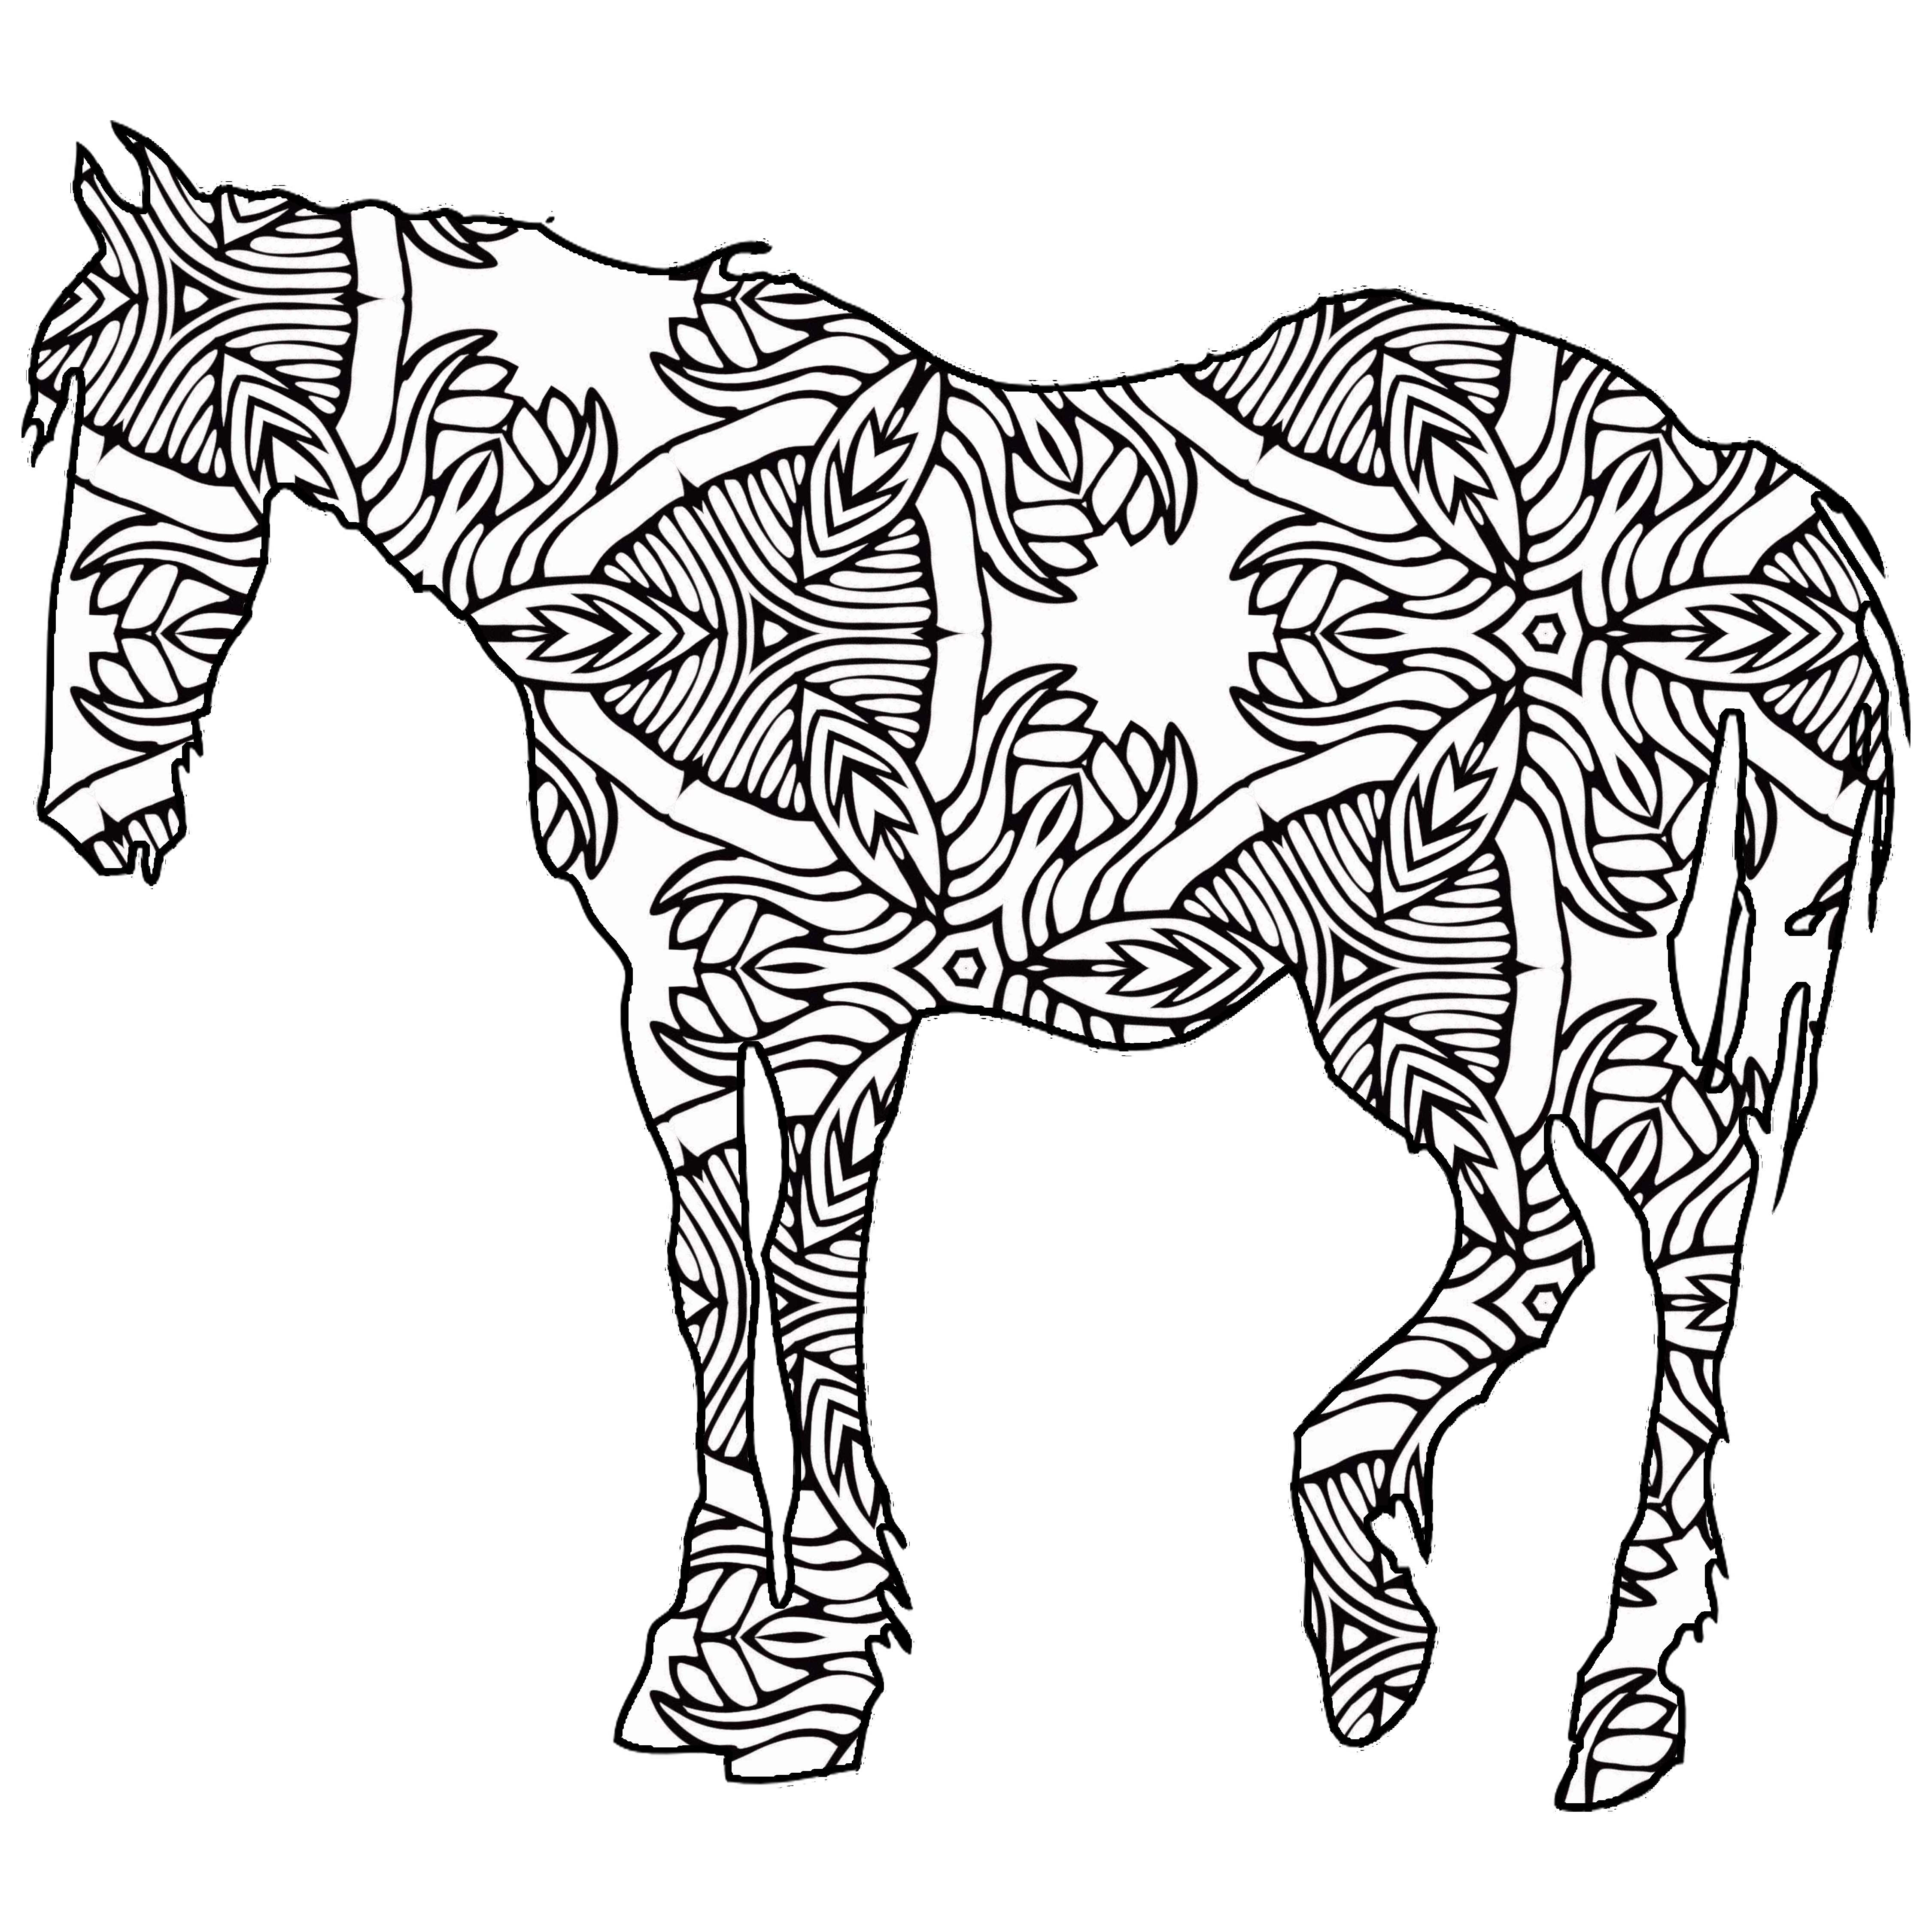 Download 30 Free Printable Geometric Animal Coloring Pages | The Cottage Market